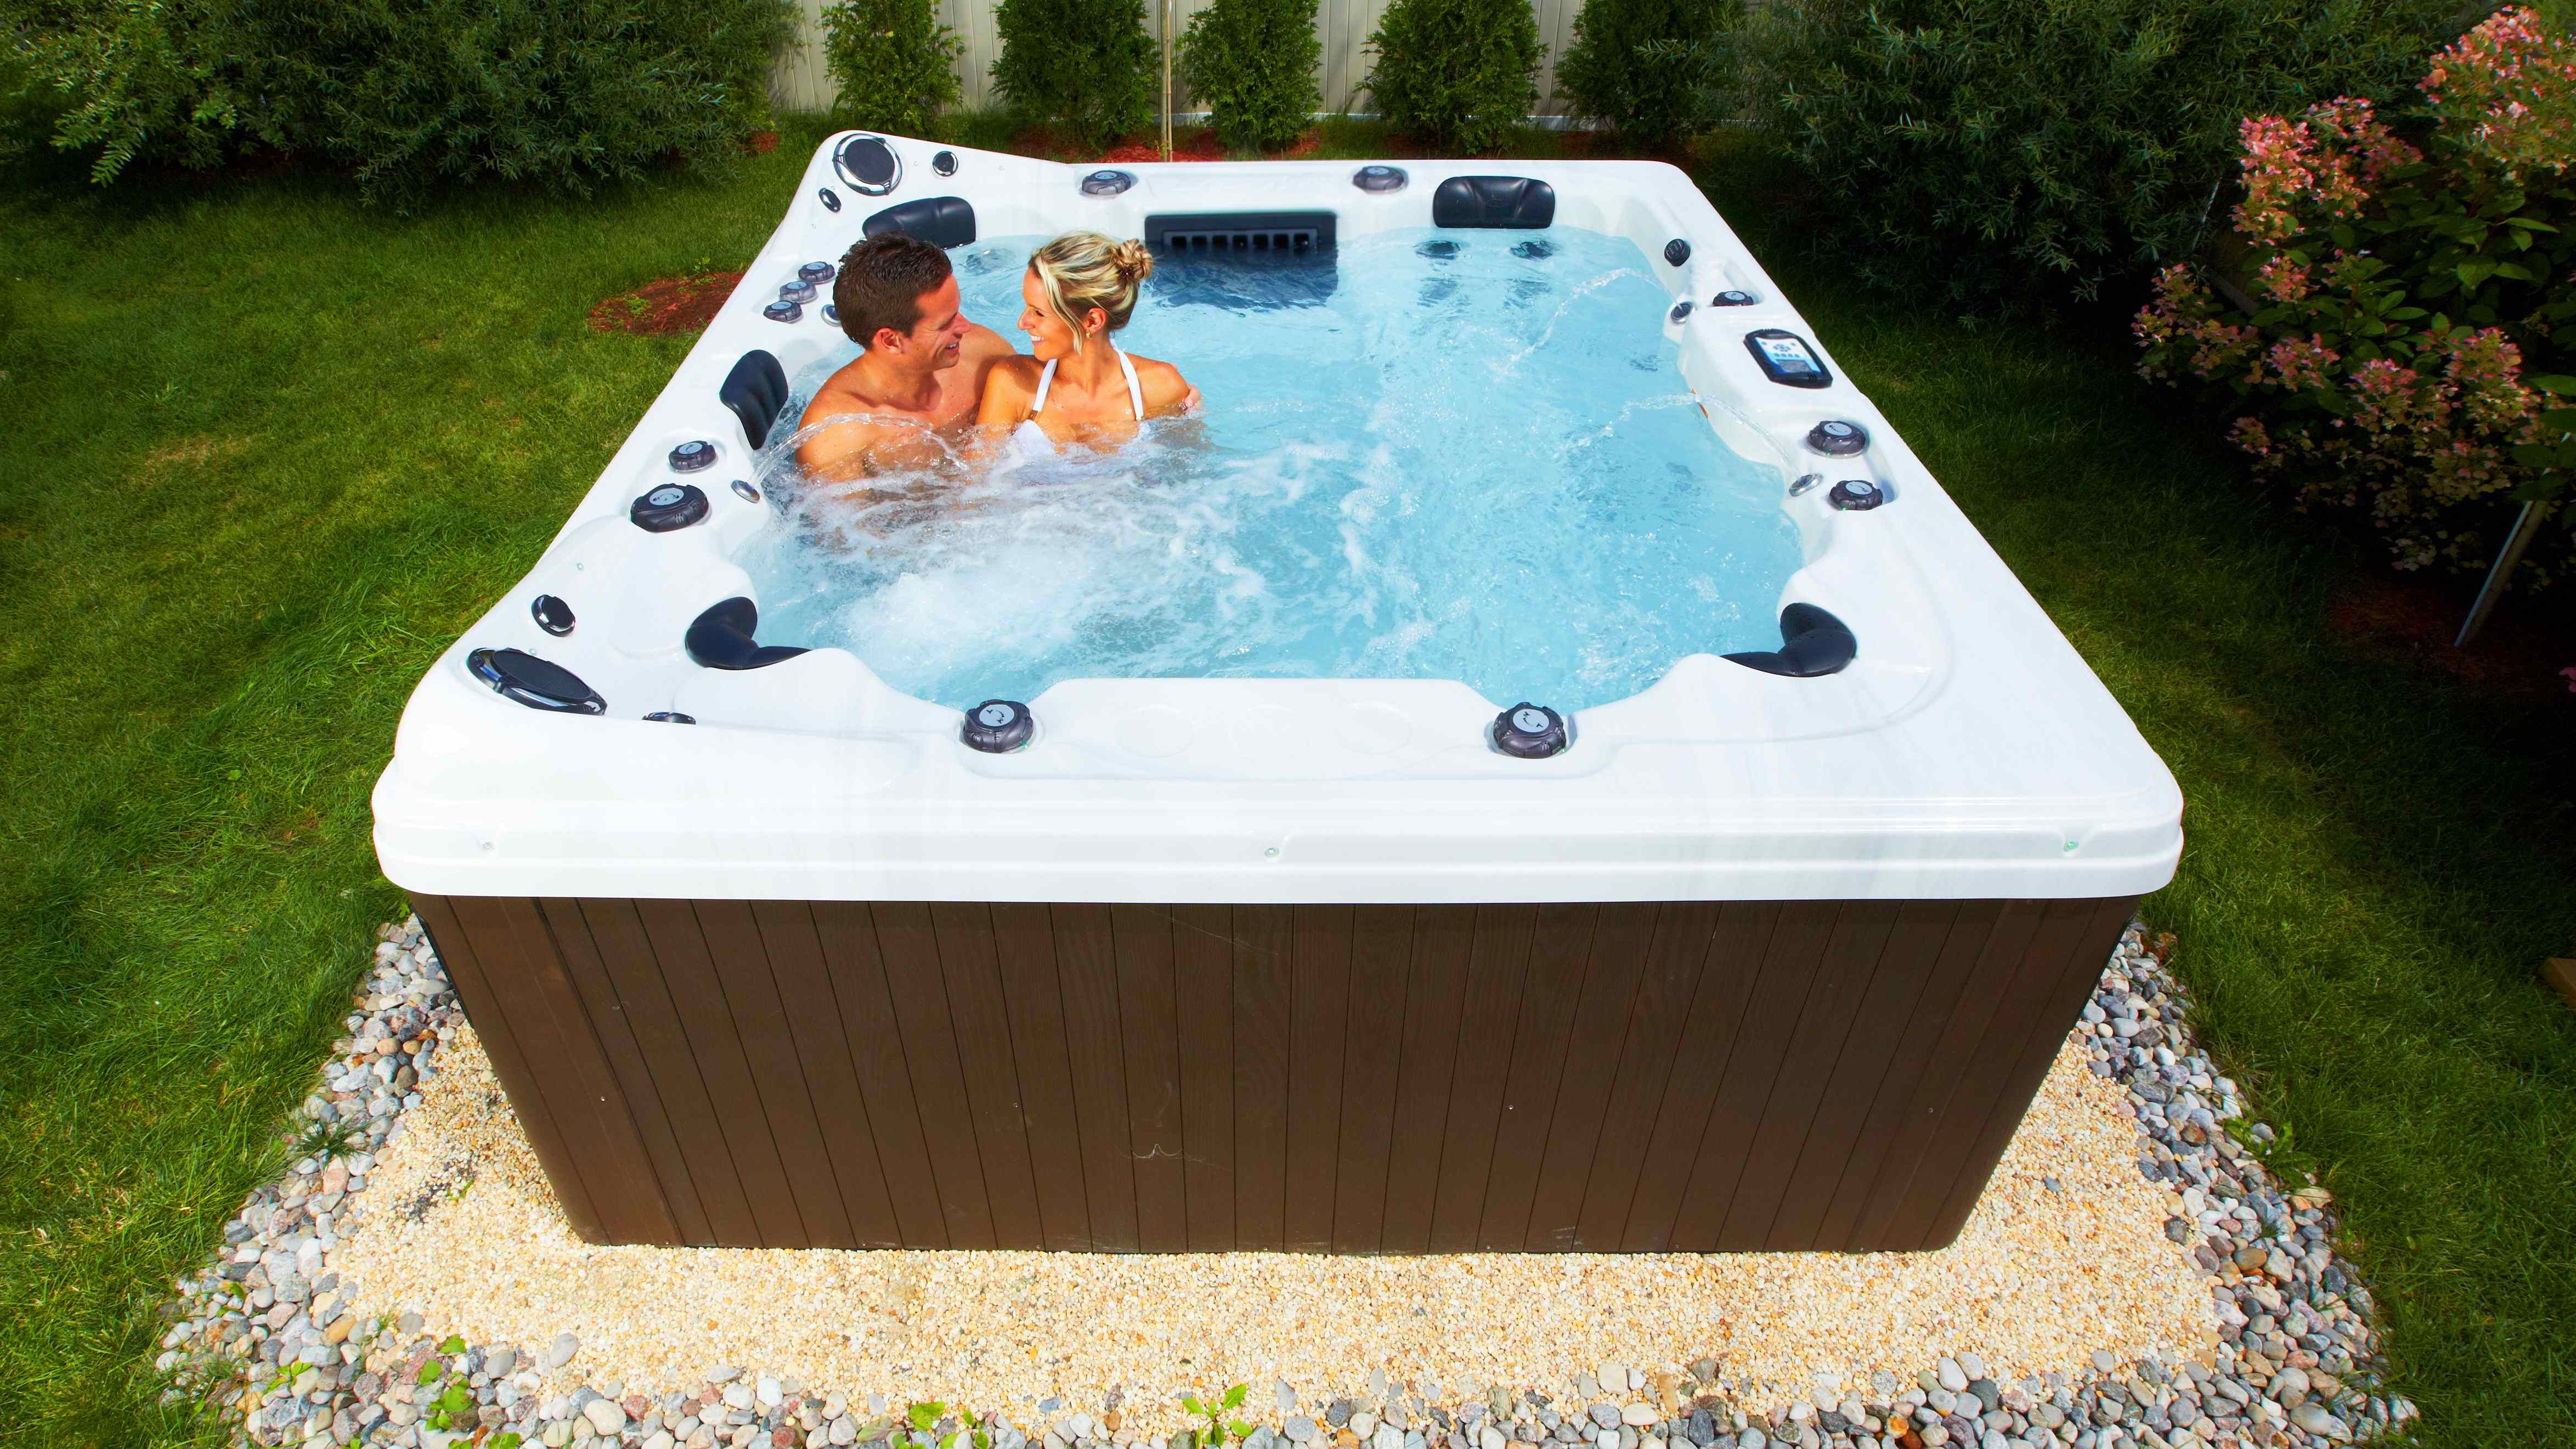 Characteristics and Features You Need to Know About the Portable Spas and Hot Tubs